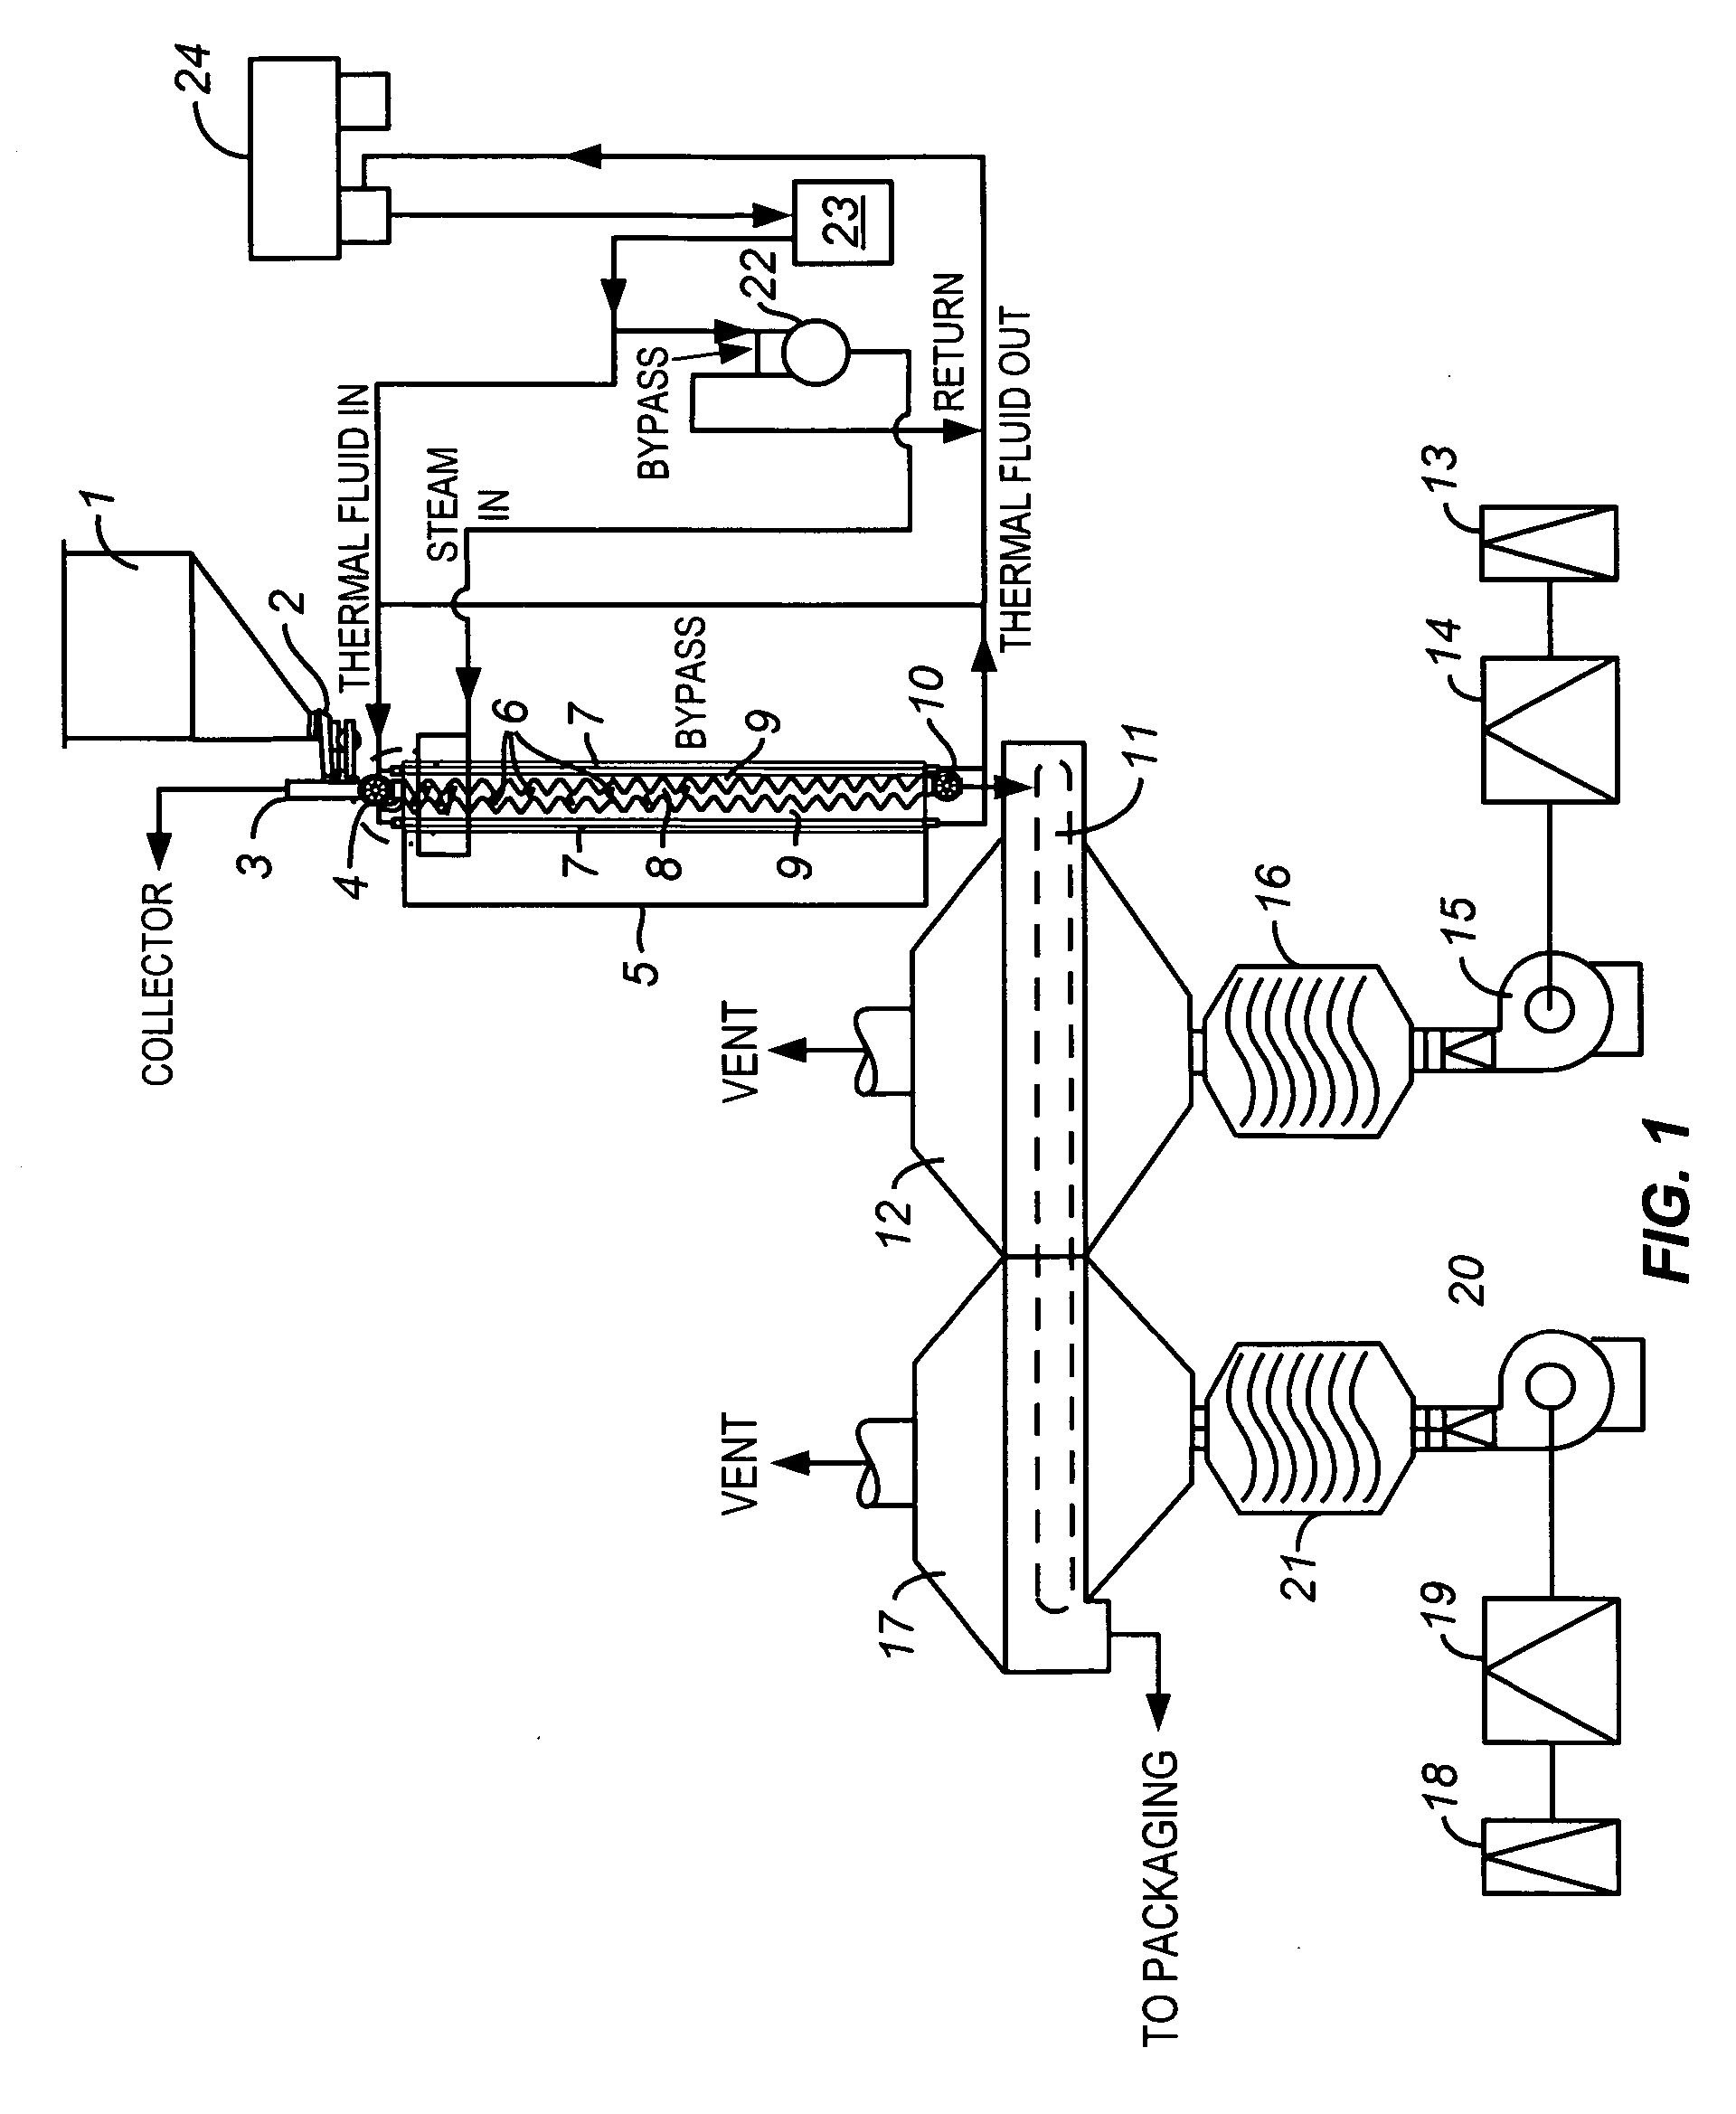 Apparatus and process for reducing microbial contamination of nuts